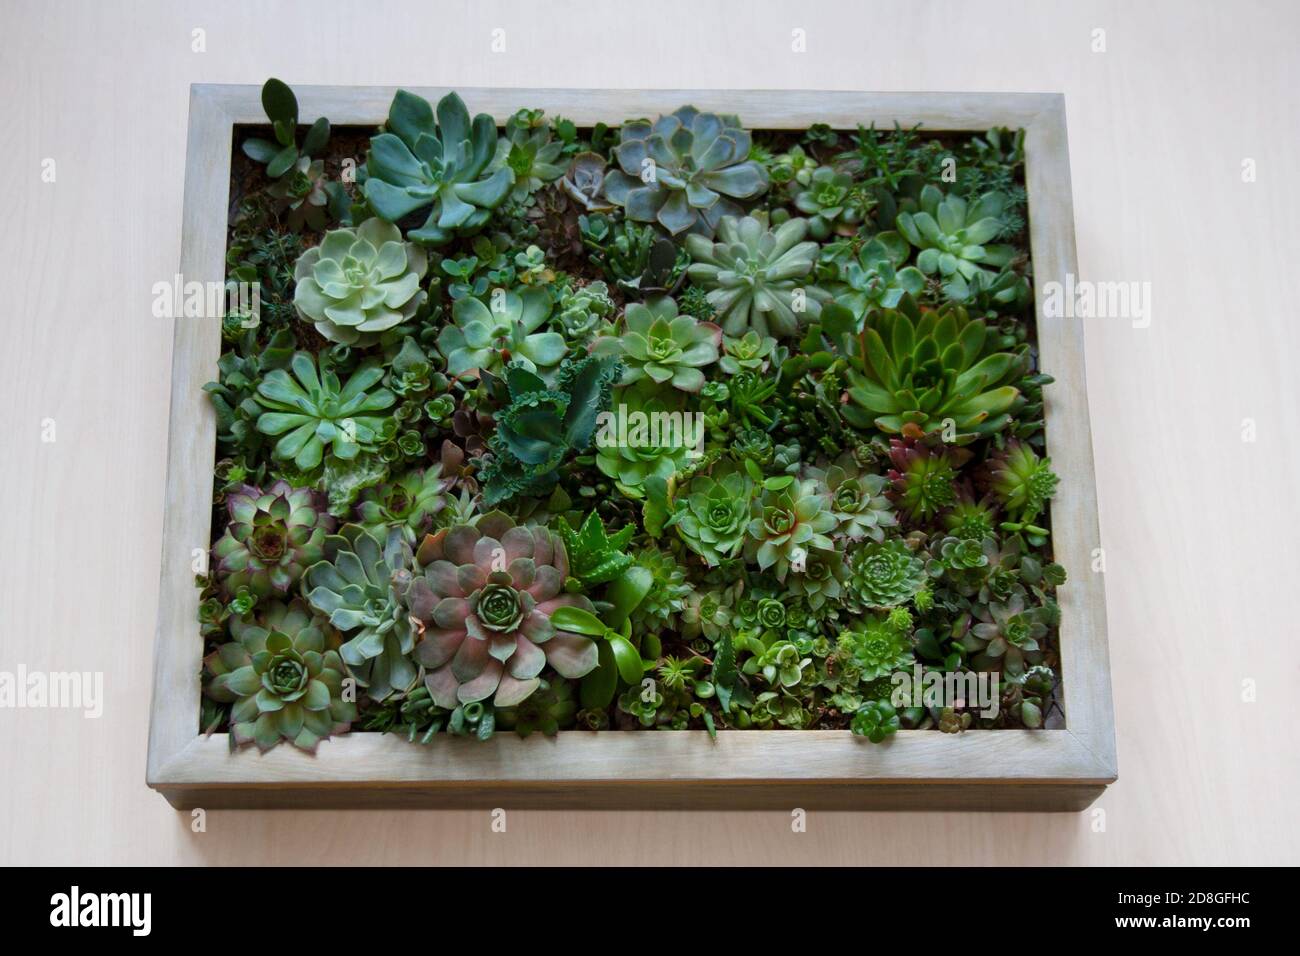 Living picture garden concept with various succulent plants arranged within a wooden frame isolated on light background Stock Photo